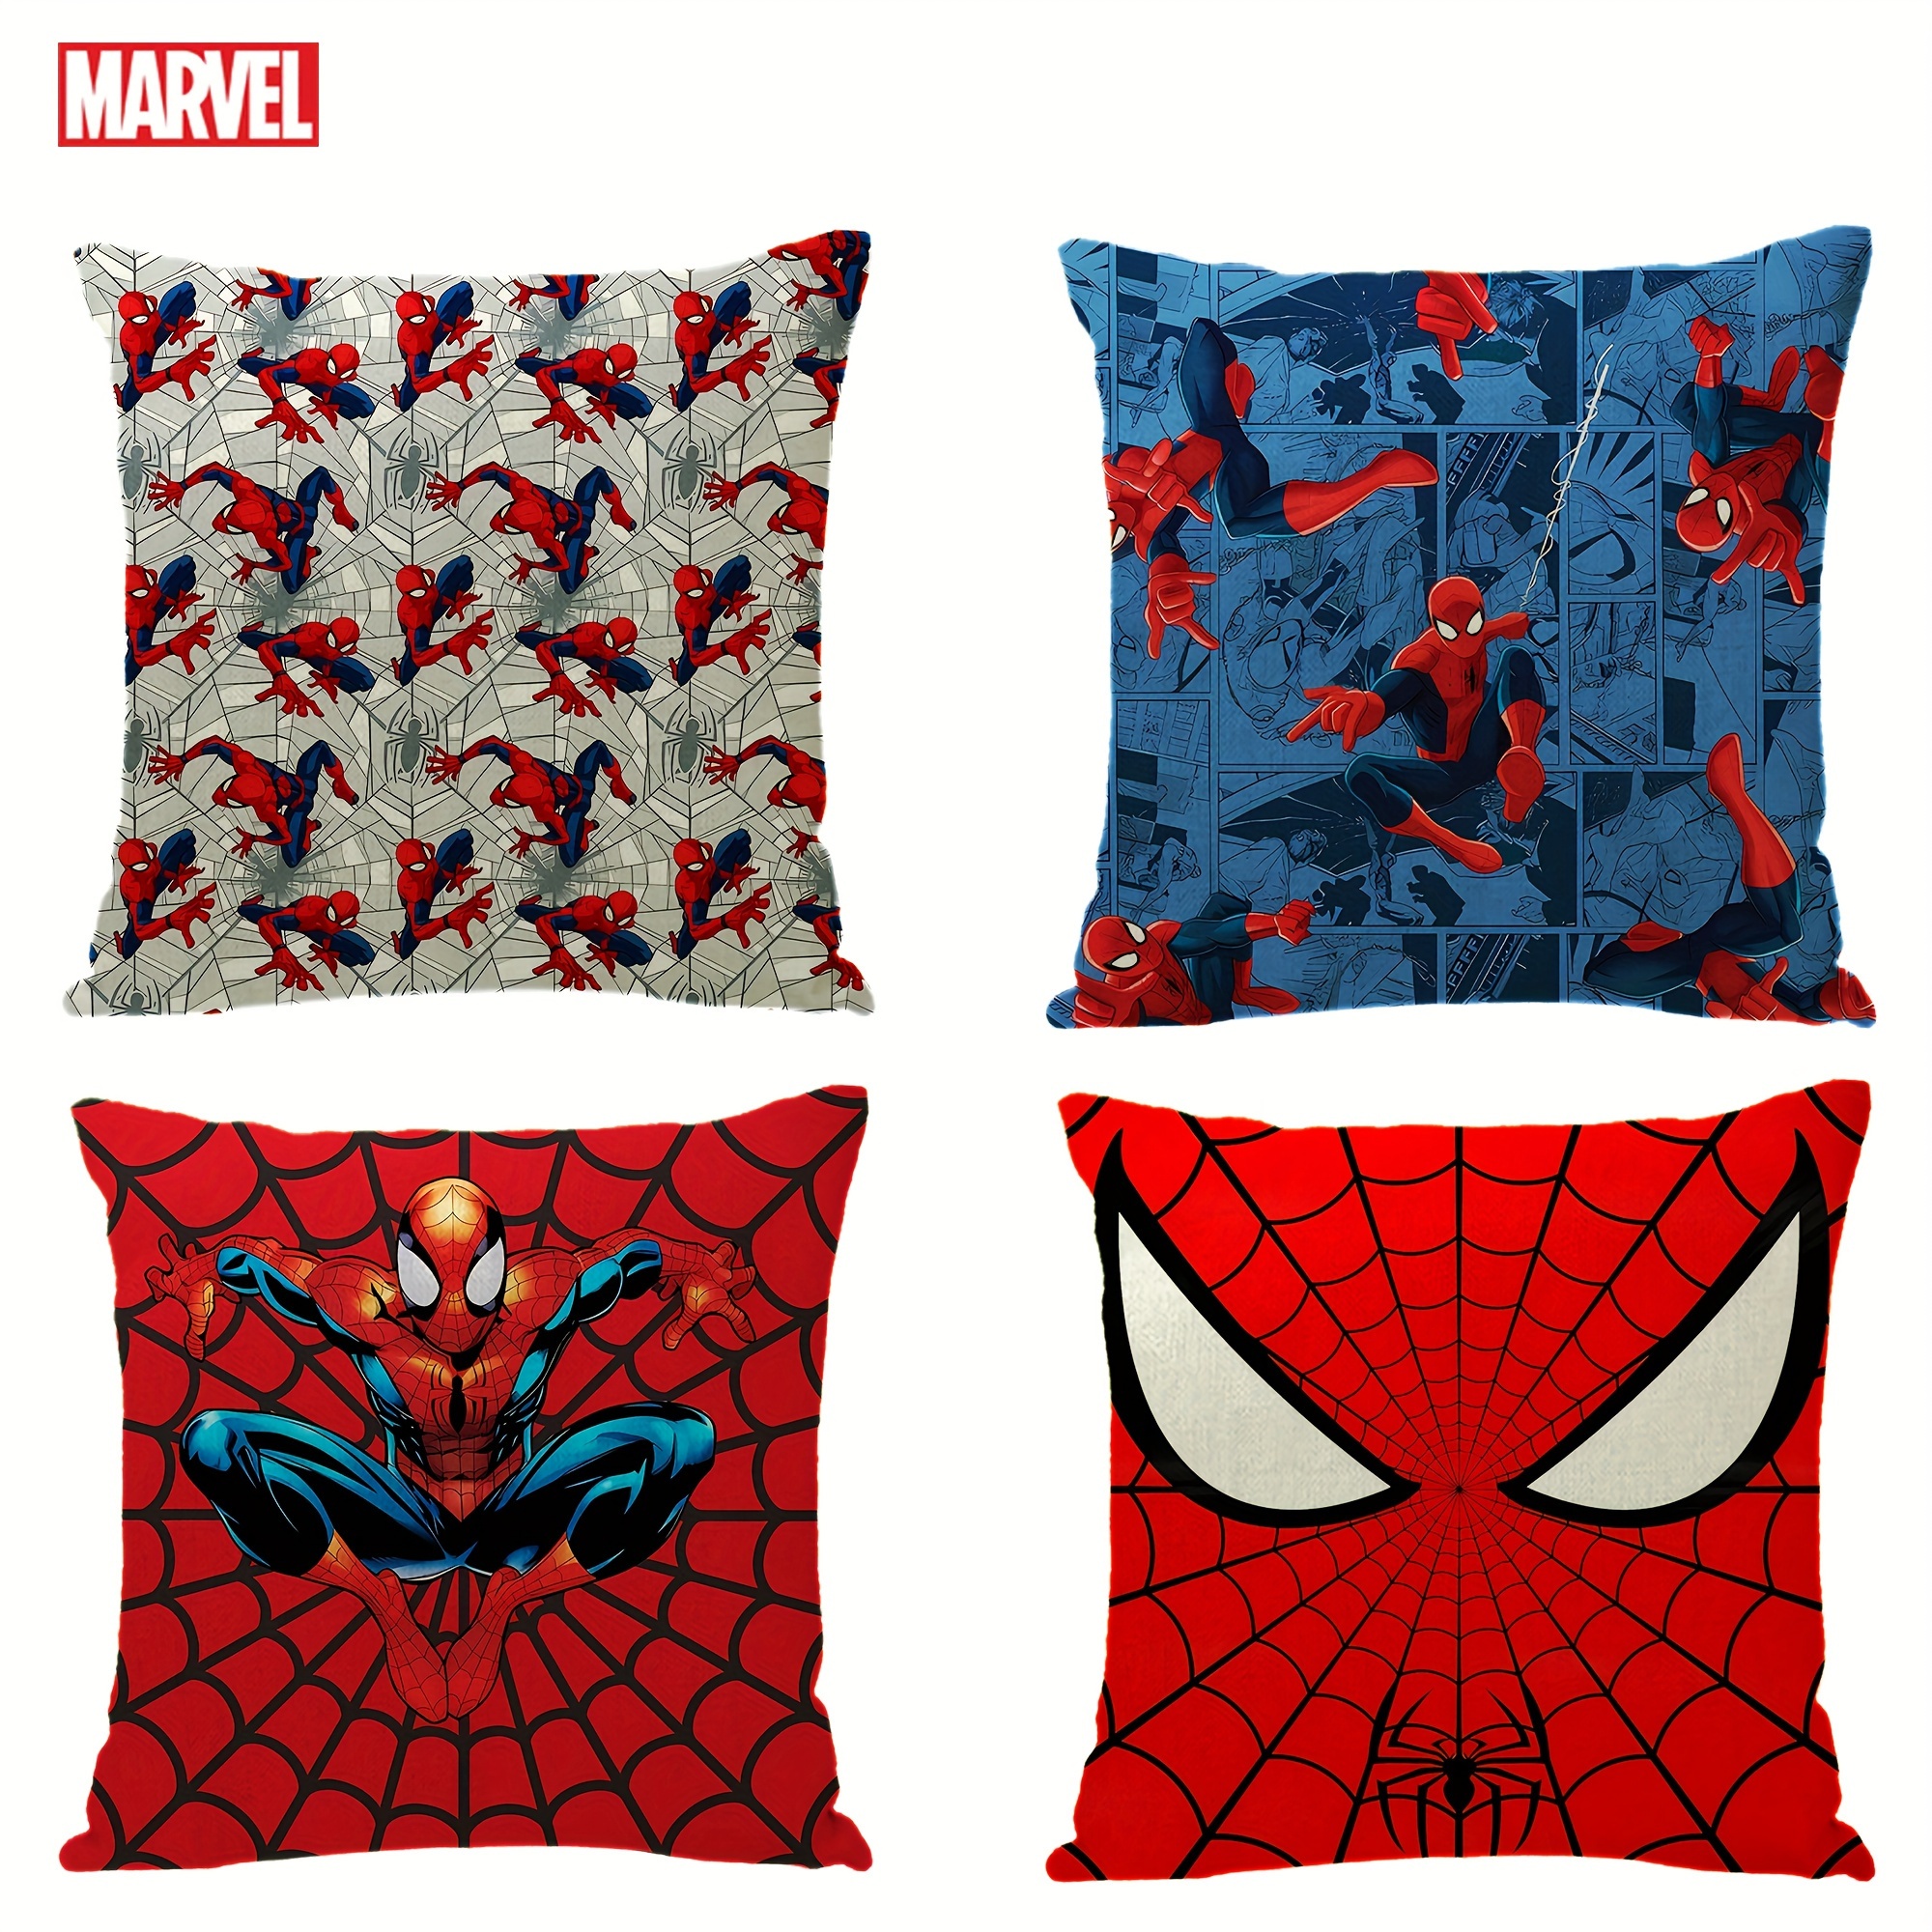 

linen Comfort" Marvel Spider-man 2024 Collectible Pillowcase (18"x18") - Vintage Style, Linen Material, Perfect For Bedroom & Car Decor